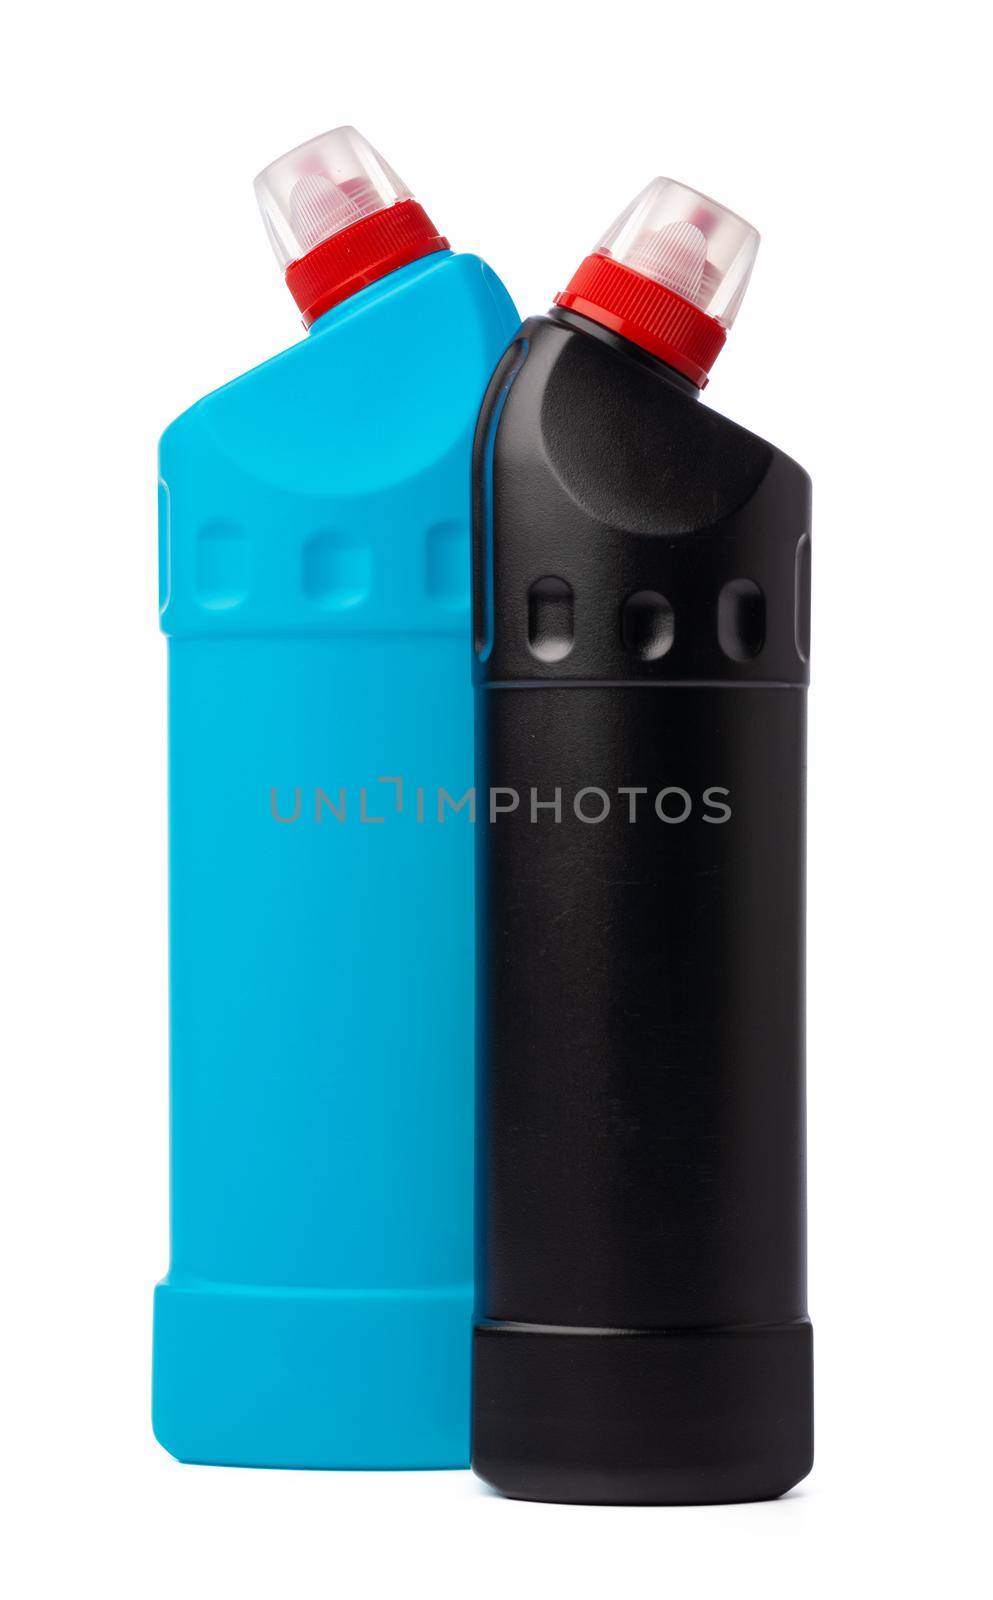 Bottle with toilet detergent household chemicals isolated on white background